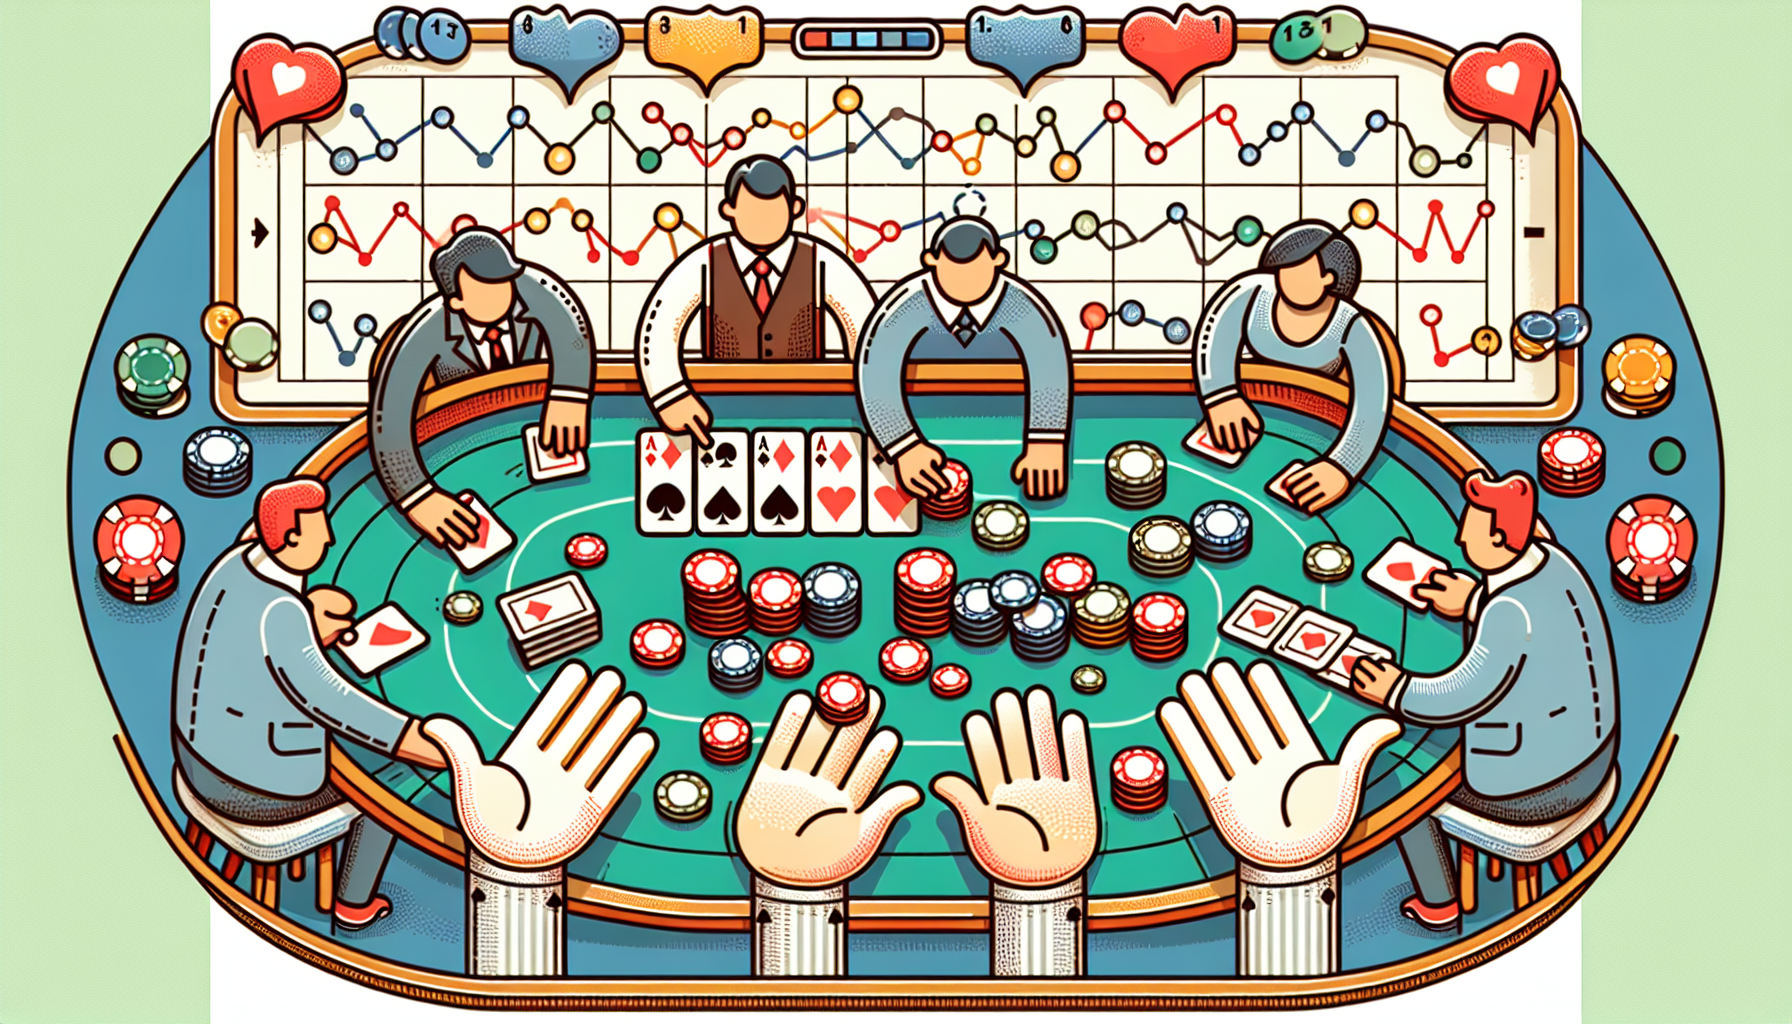 Illustration of basic poker rules and hand rankings